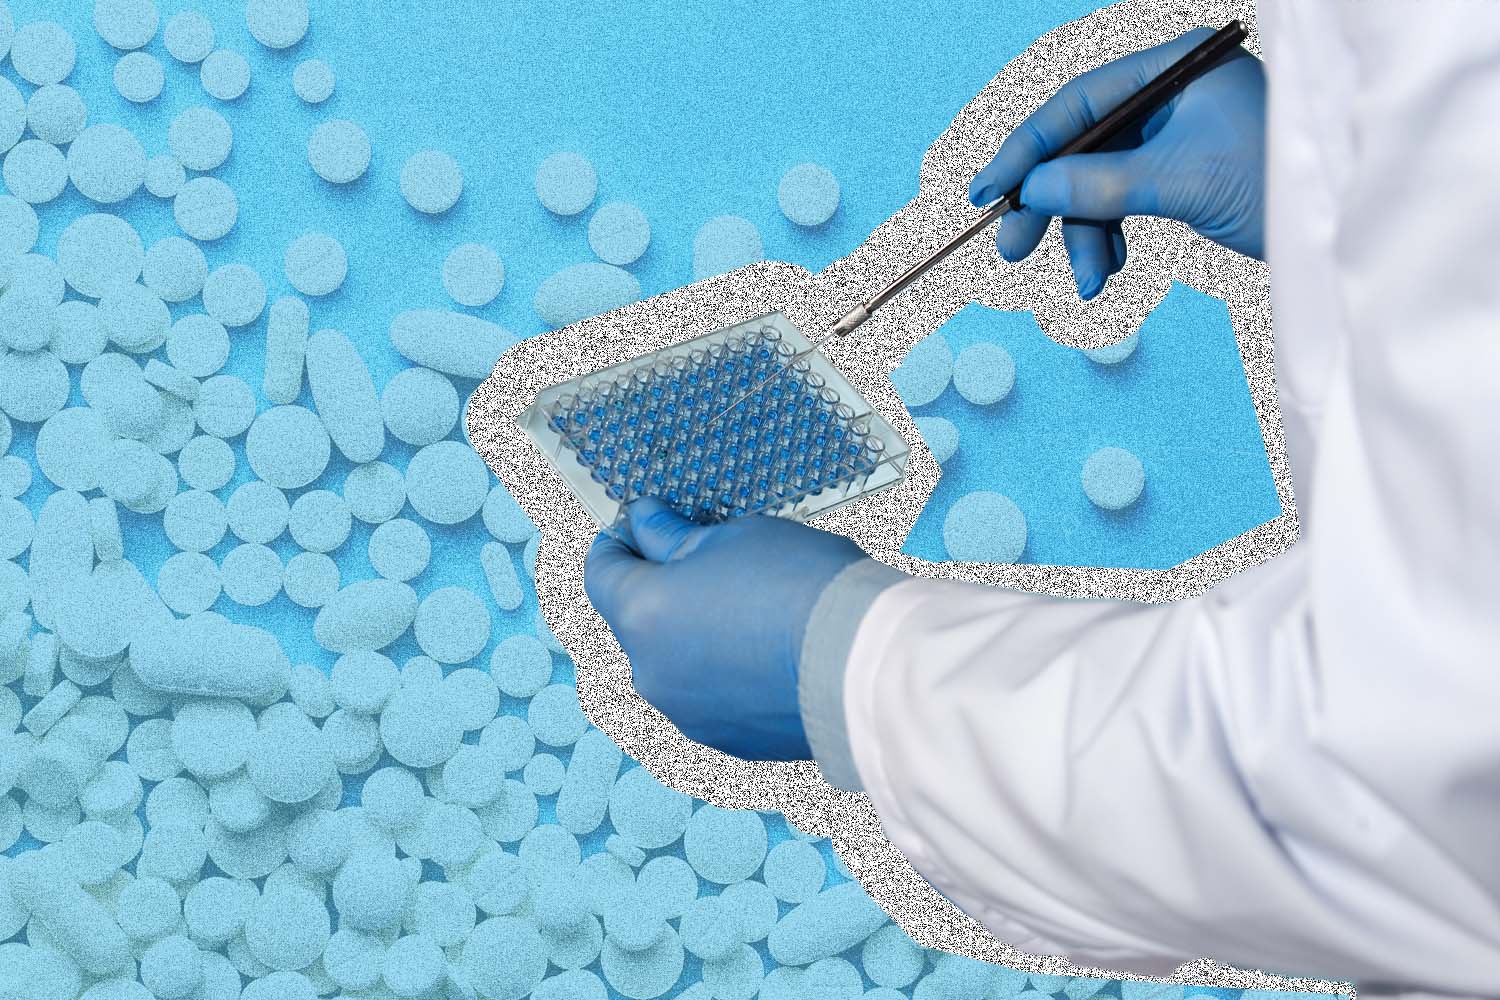 Person holding pipette over a pile of pills